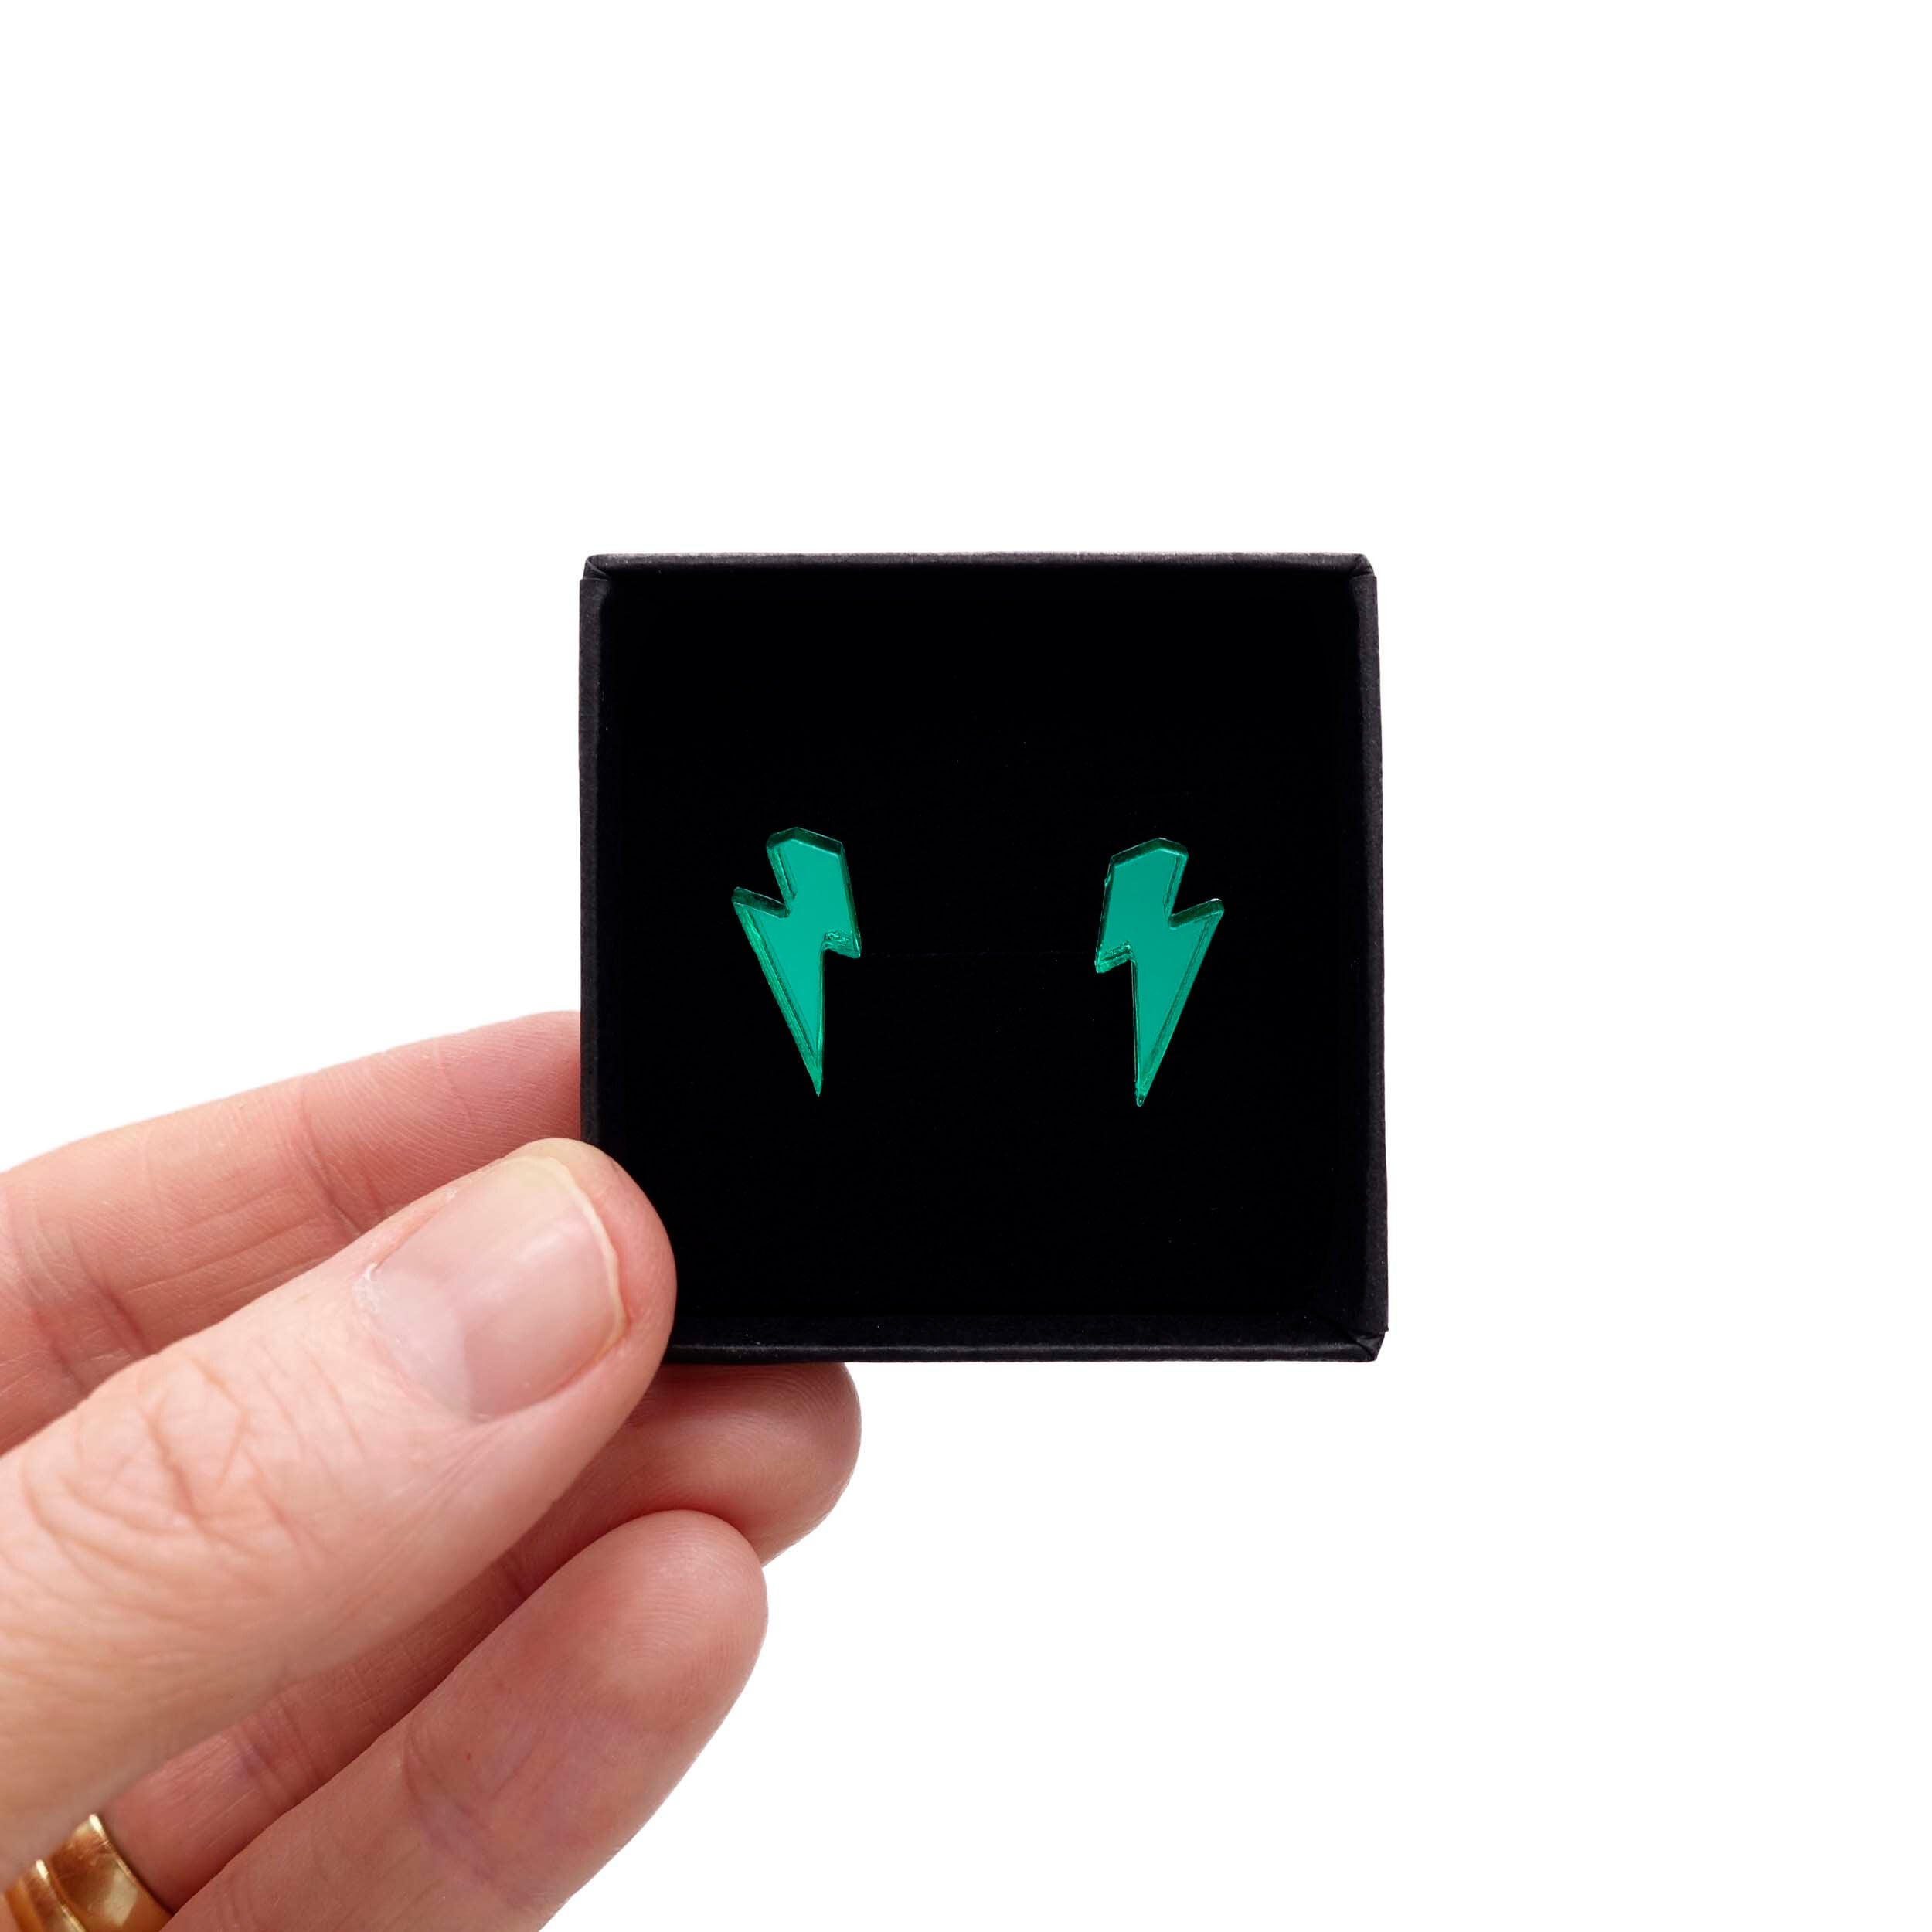 Tiny lightning bolt earrings in electric green mirror. 